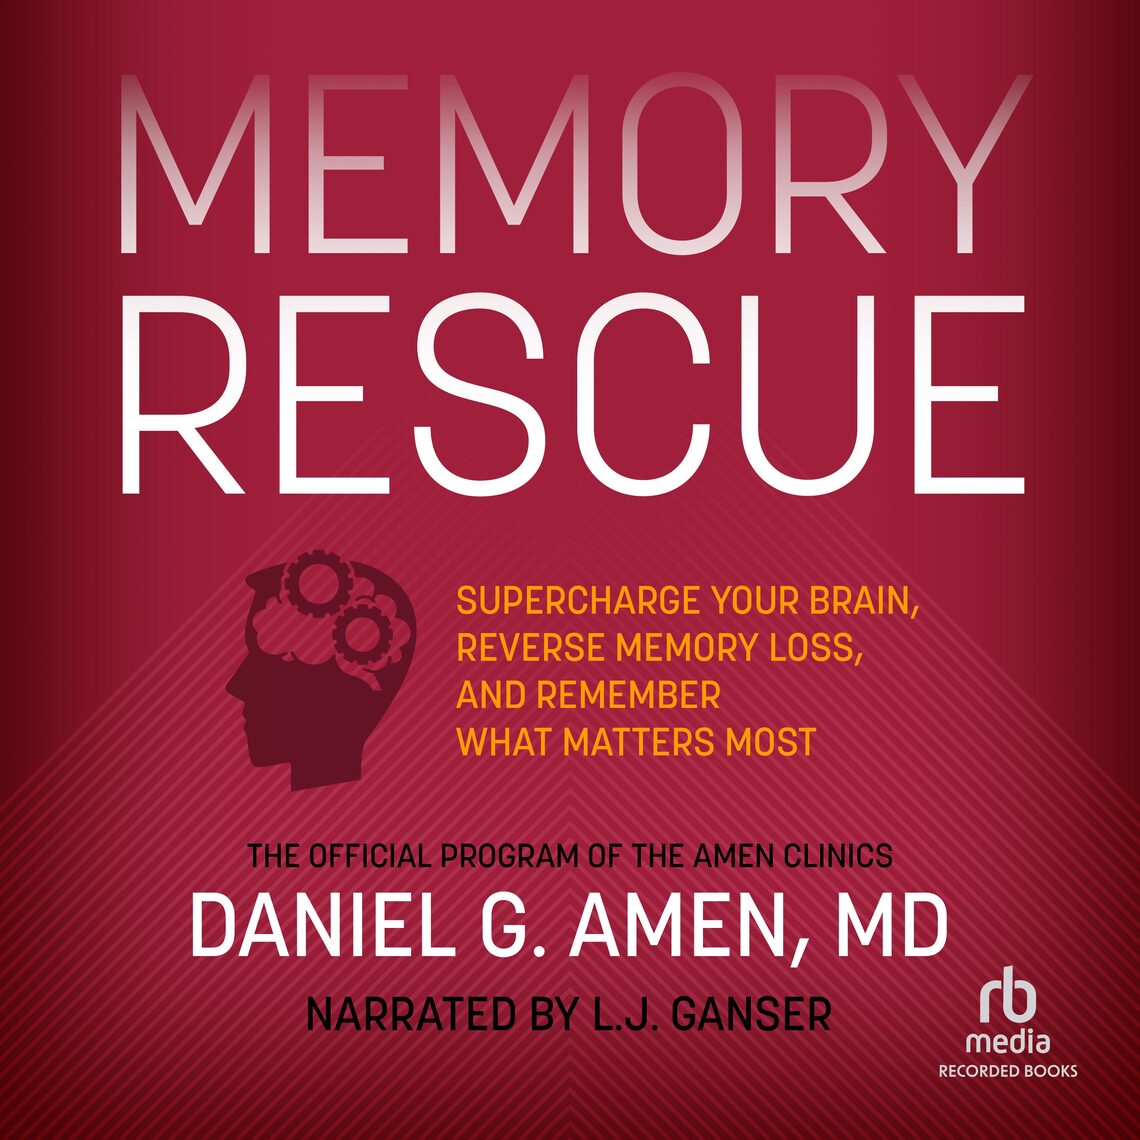 Memory Rescue by Daniel G. Amen (Audiobook) - Read free for 30 days